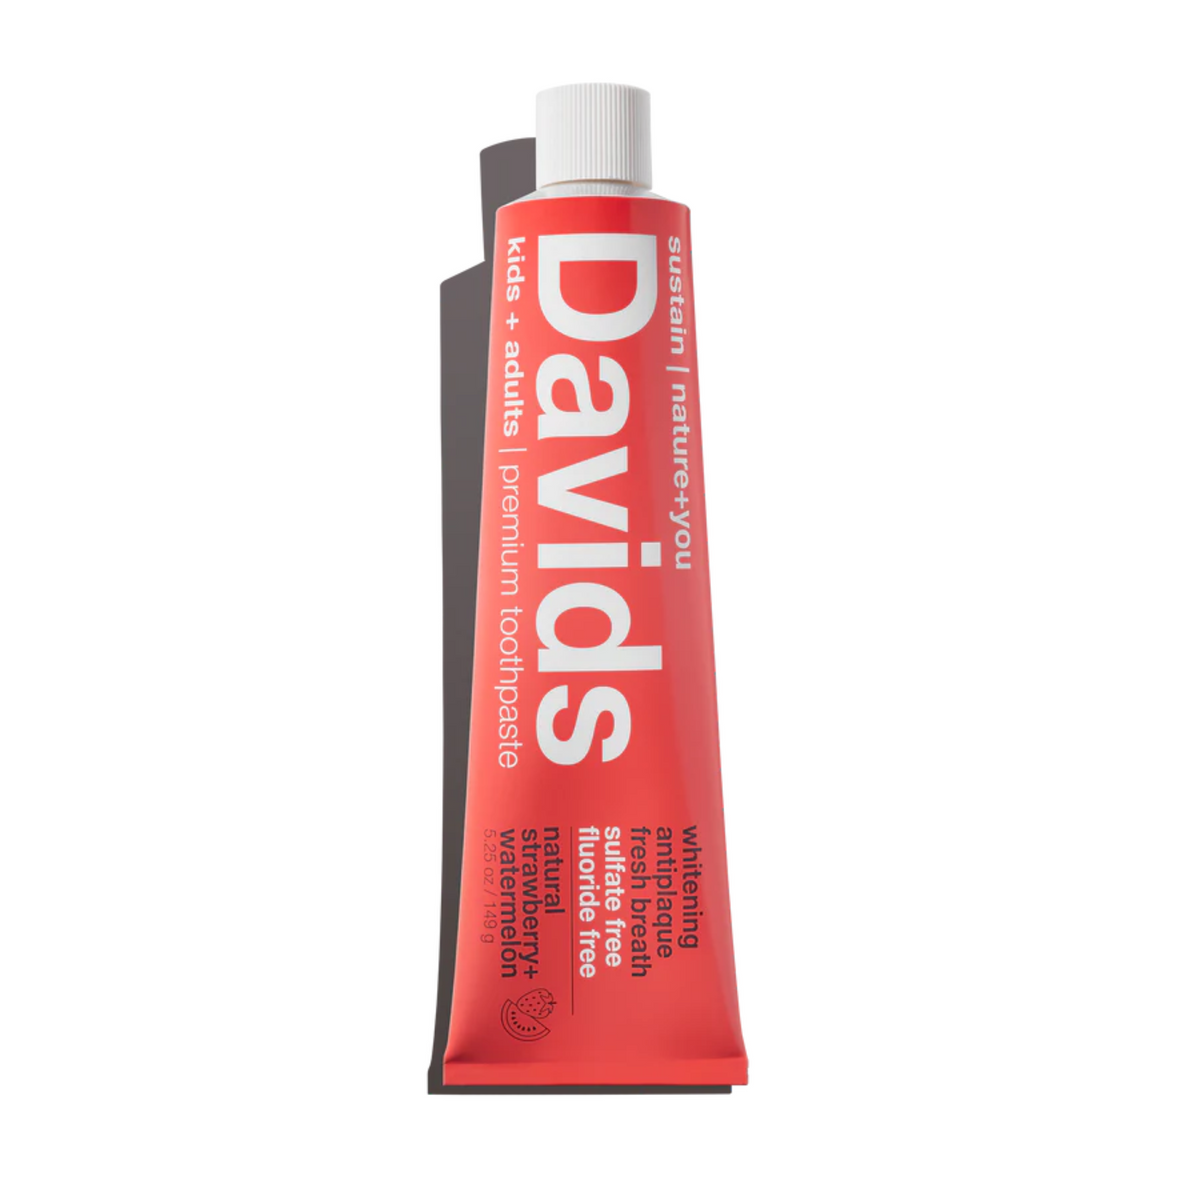 Primary Image of Davids Strawberry Watermelon Natural Toothpaste (5.25 oz) 